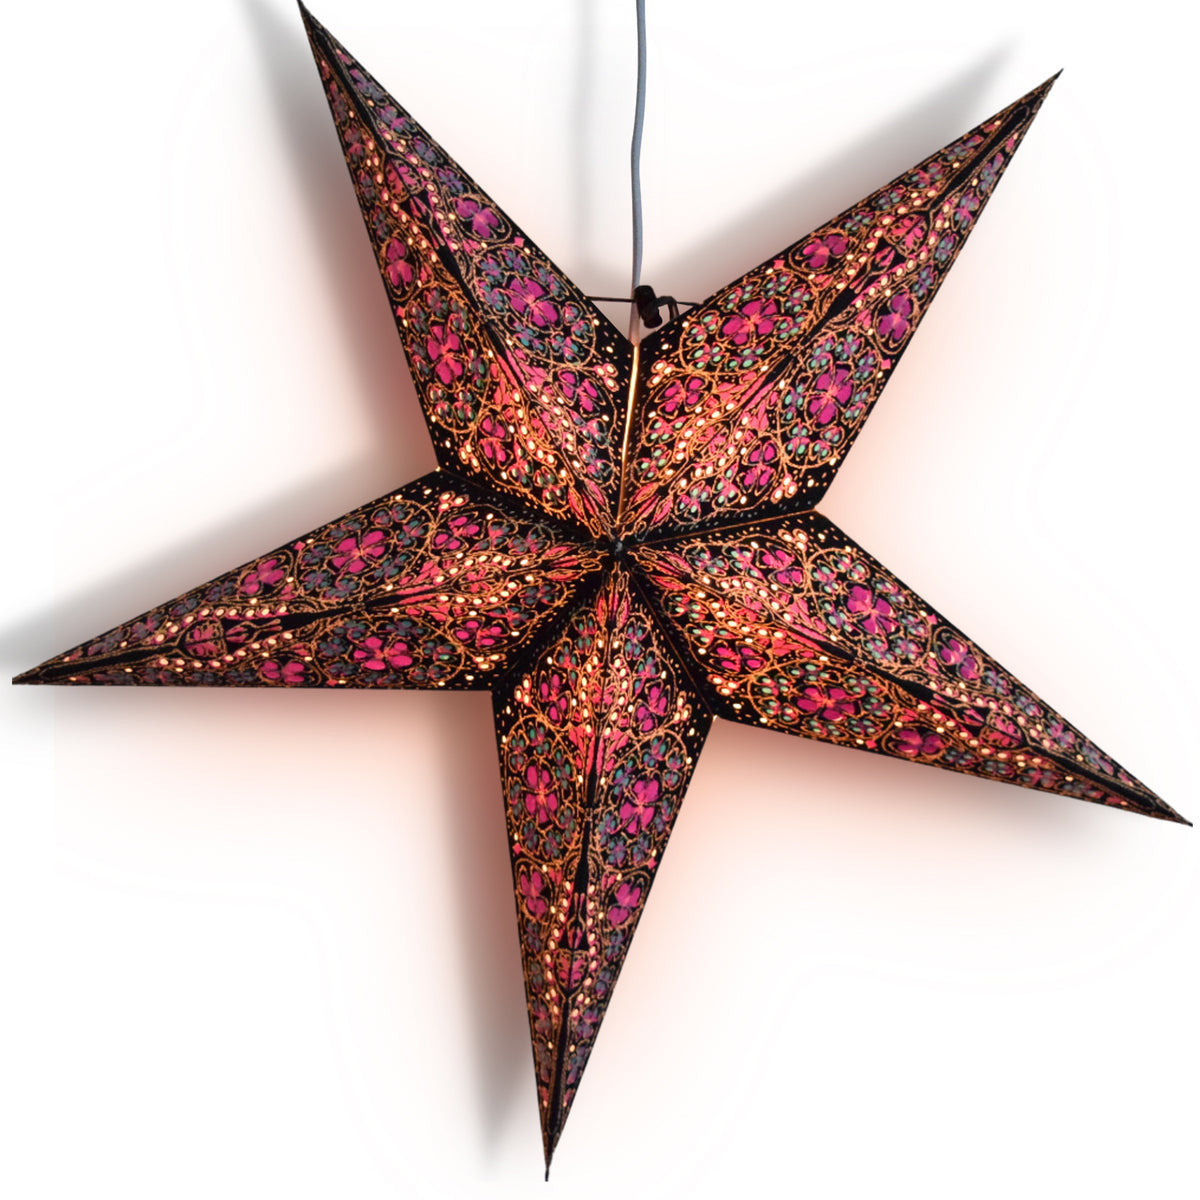 3-PACK 24&quot; Purple Garden Paper Star Lantern, with LED Bulbs and Lamp Cord Light Included